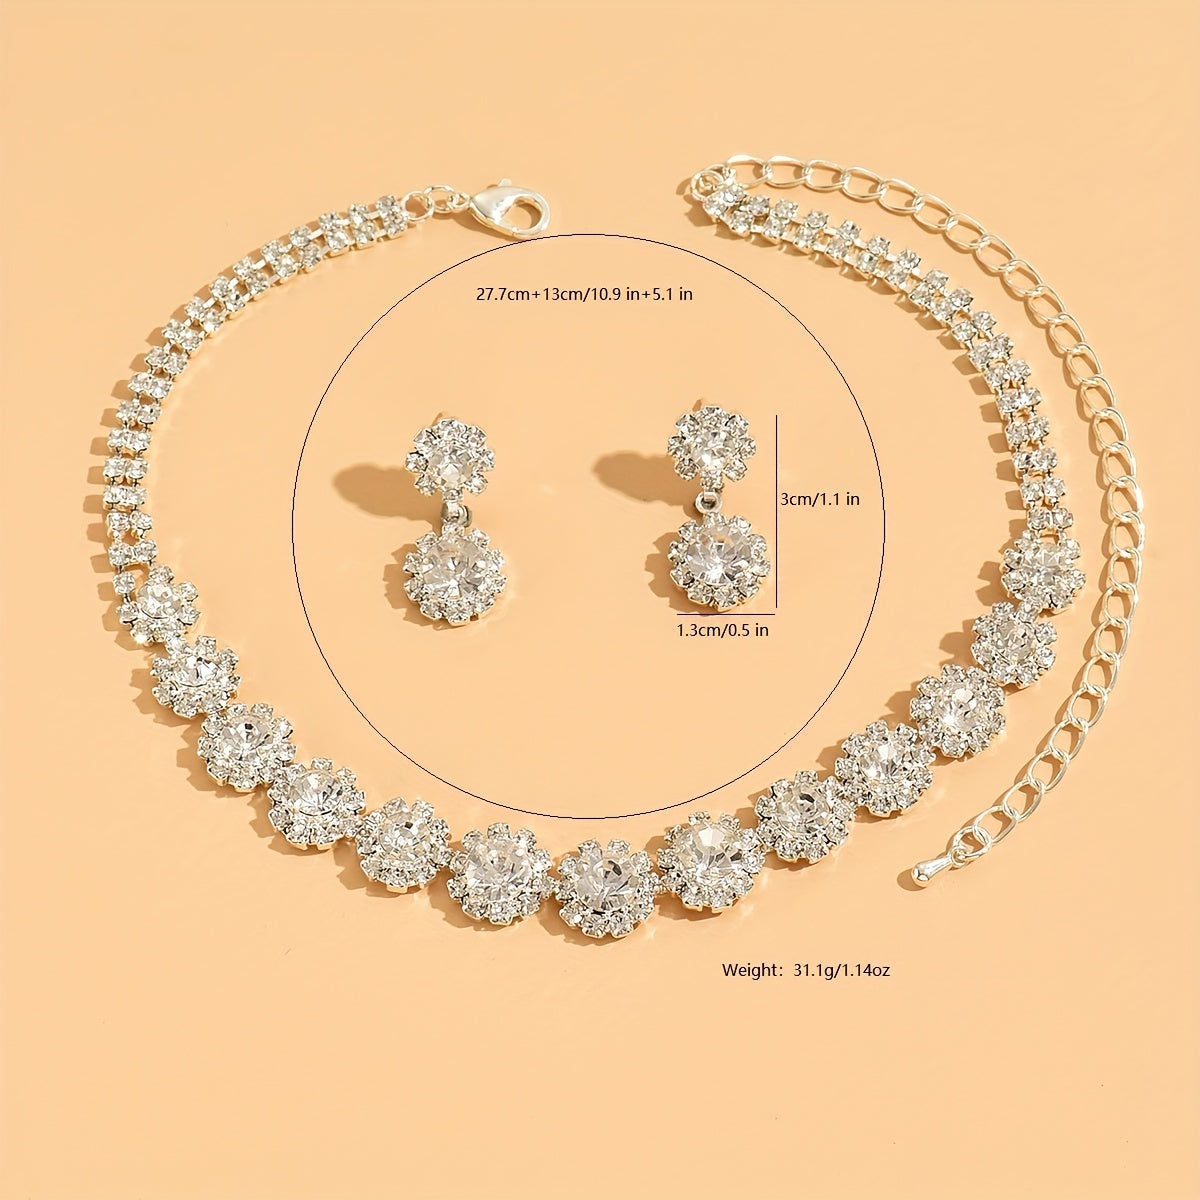 Elegant Round Rhinestone Choker and Earrings Set for Weddings and Parties